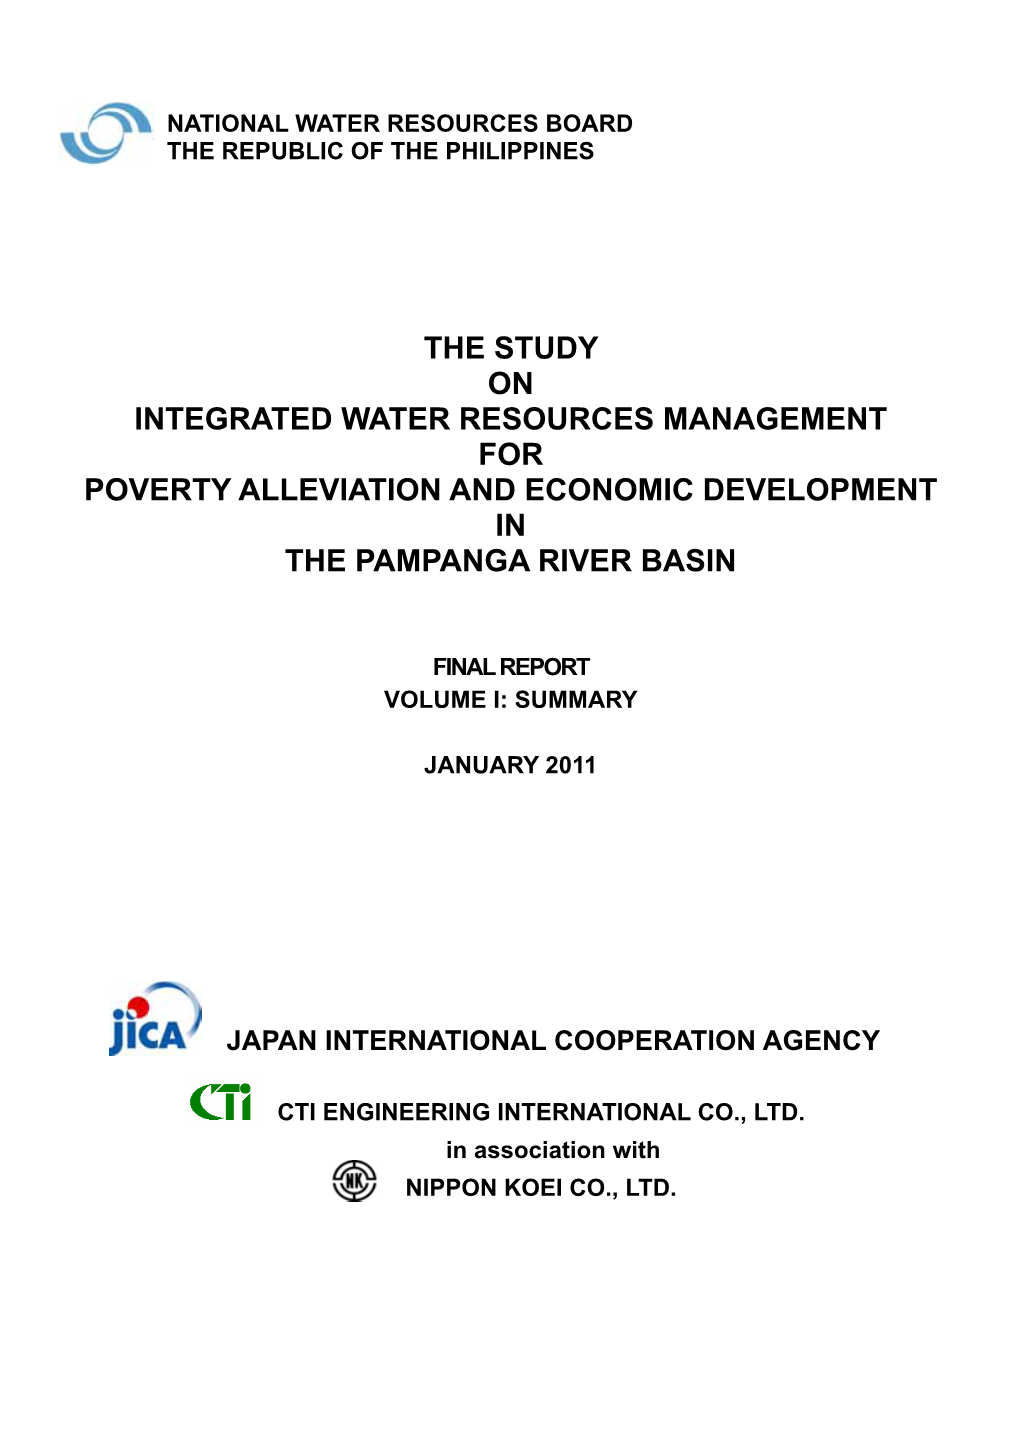 The Study on Integrated Water Resources Management for Poverty Alleviation and Economic Development in the Pampanga River Basin